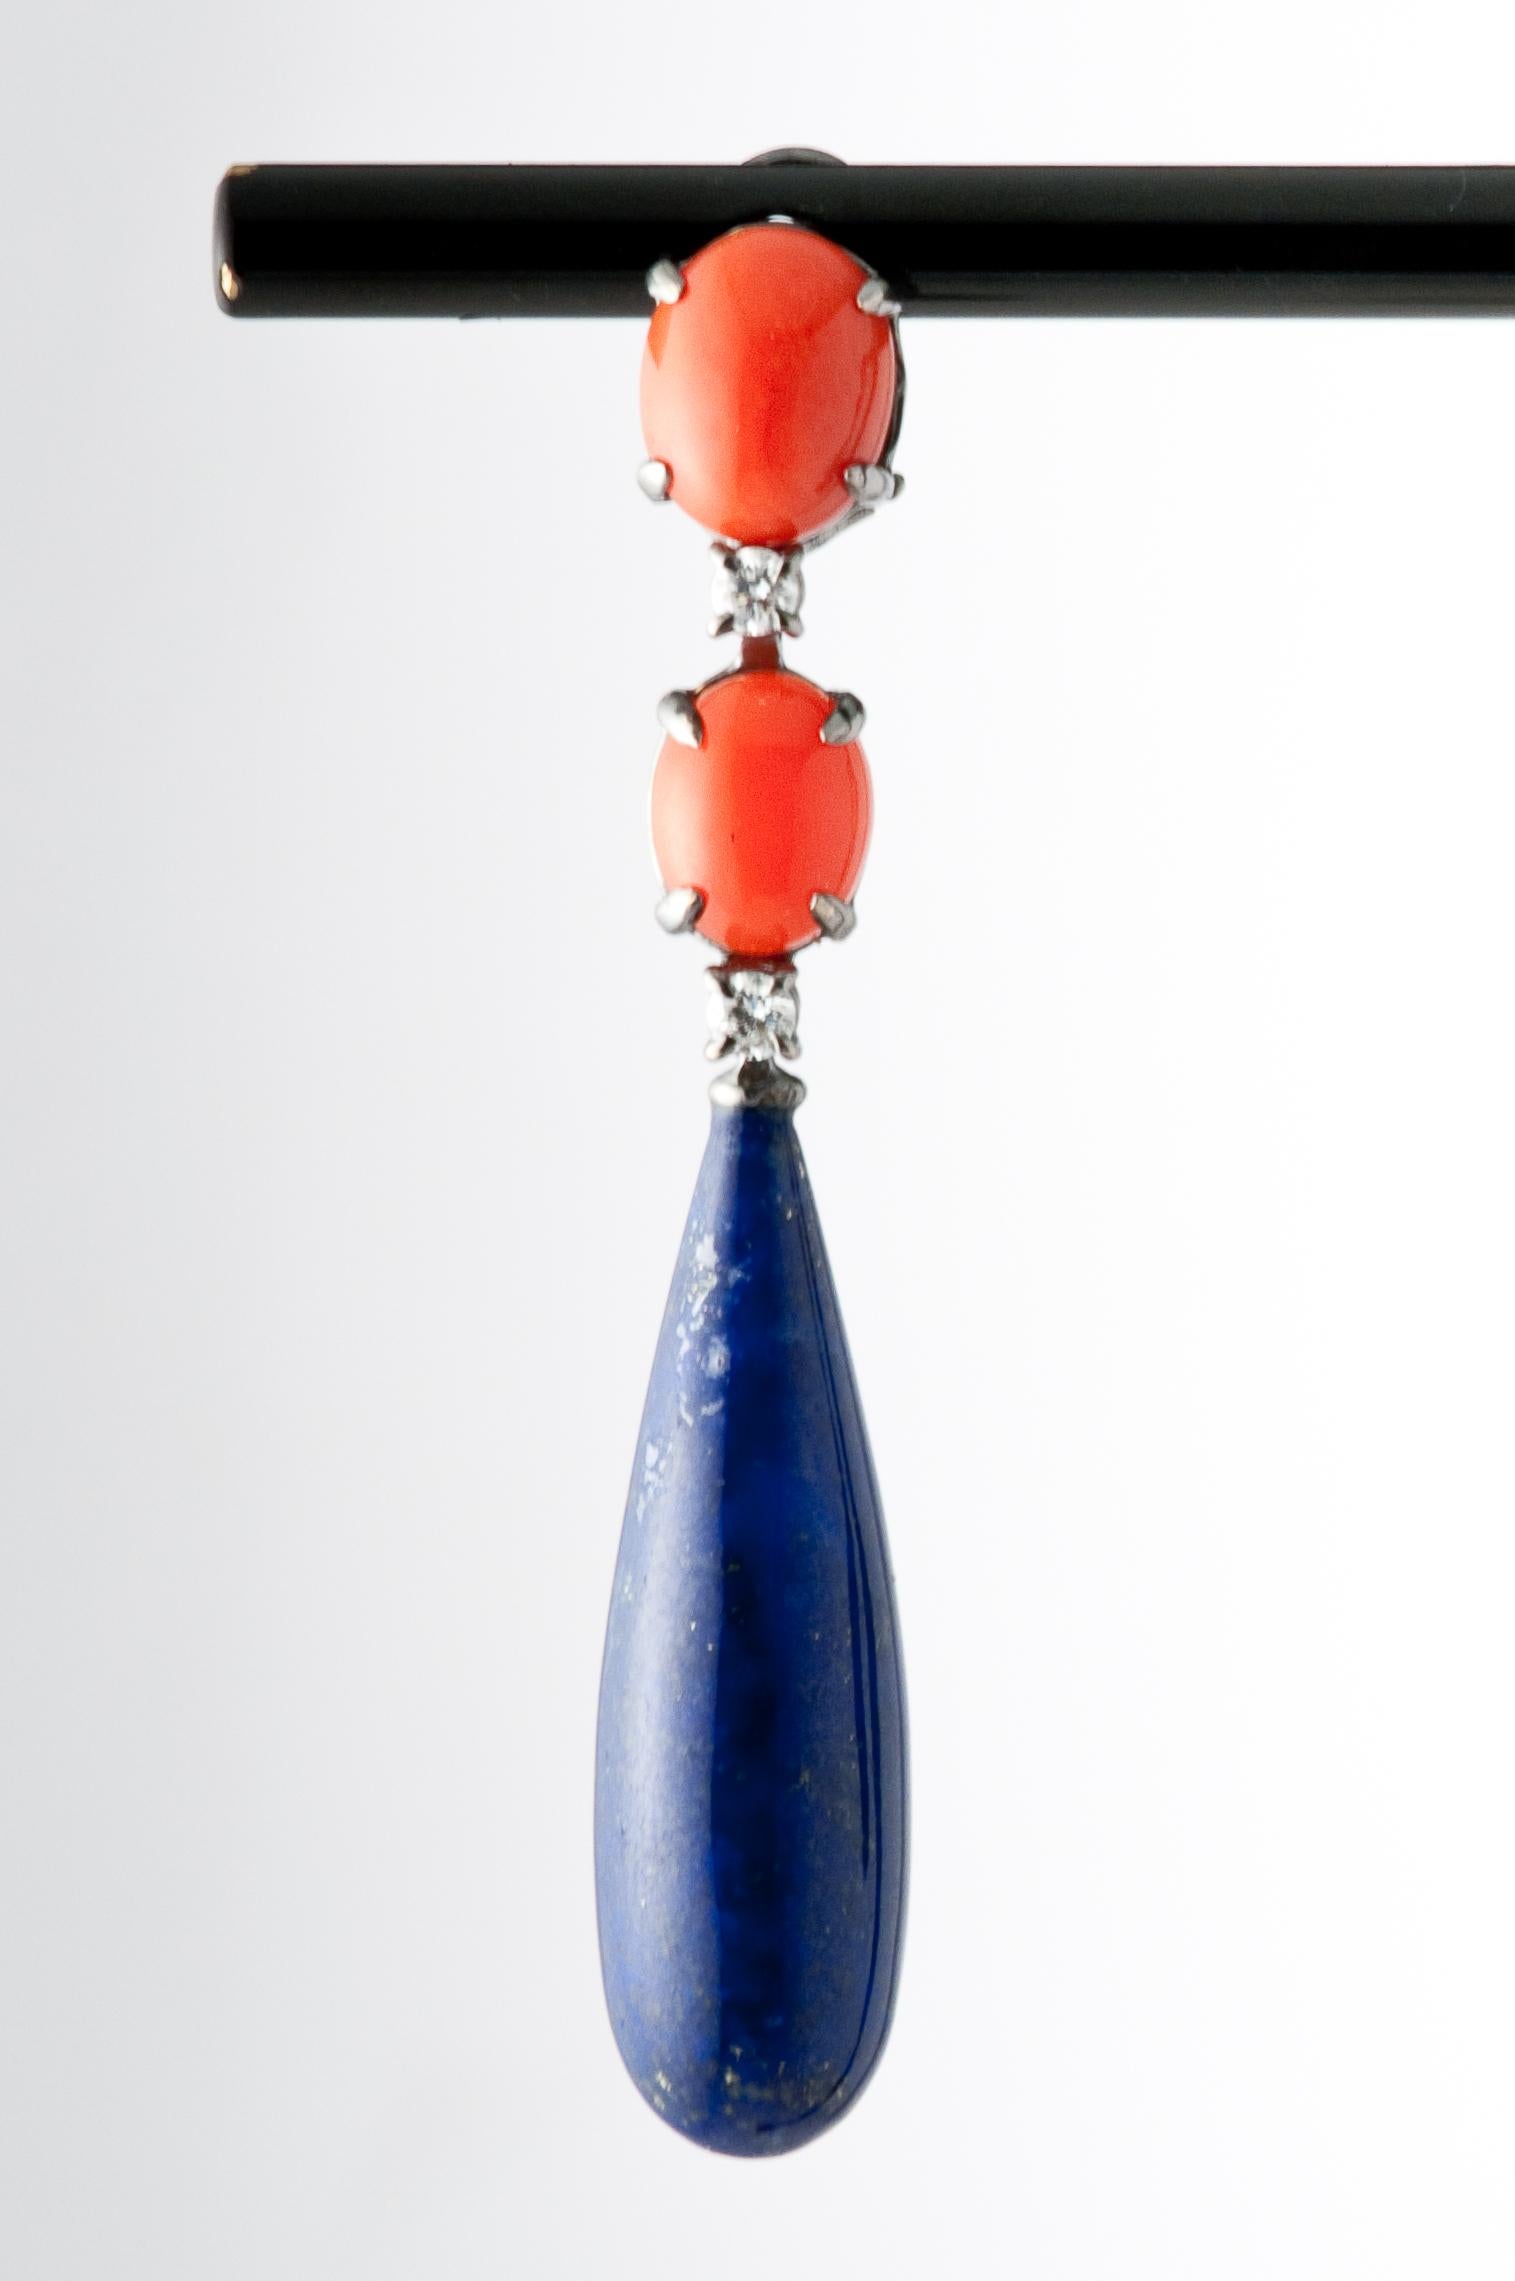 These cabochon coral and lapis lazuli chandelier earrings are a masterpiece of craftsmanship and design. The premium gemstones are carefully selected for their vibrant colour and timeless beauty.

The 0.32 carat diamonds add a touch of glamour and